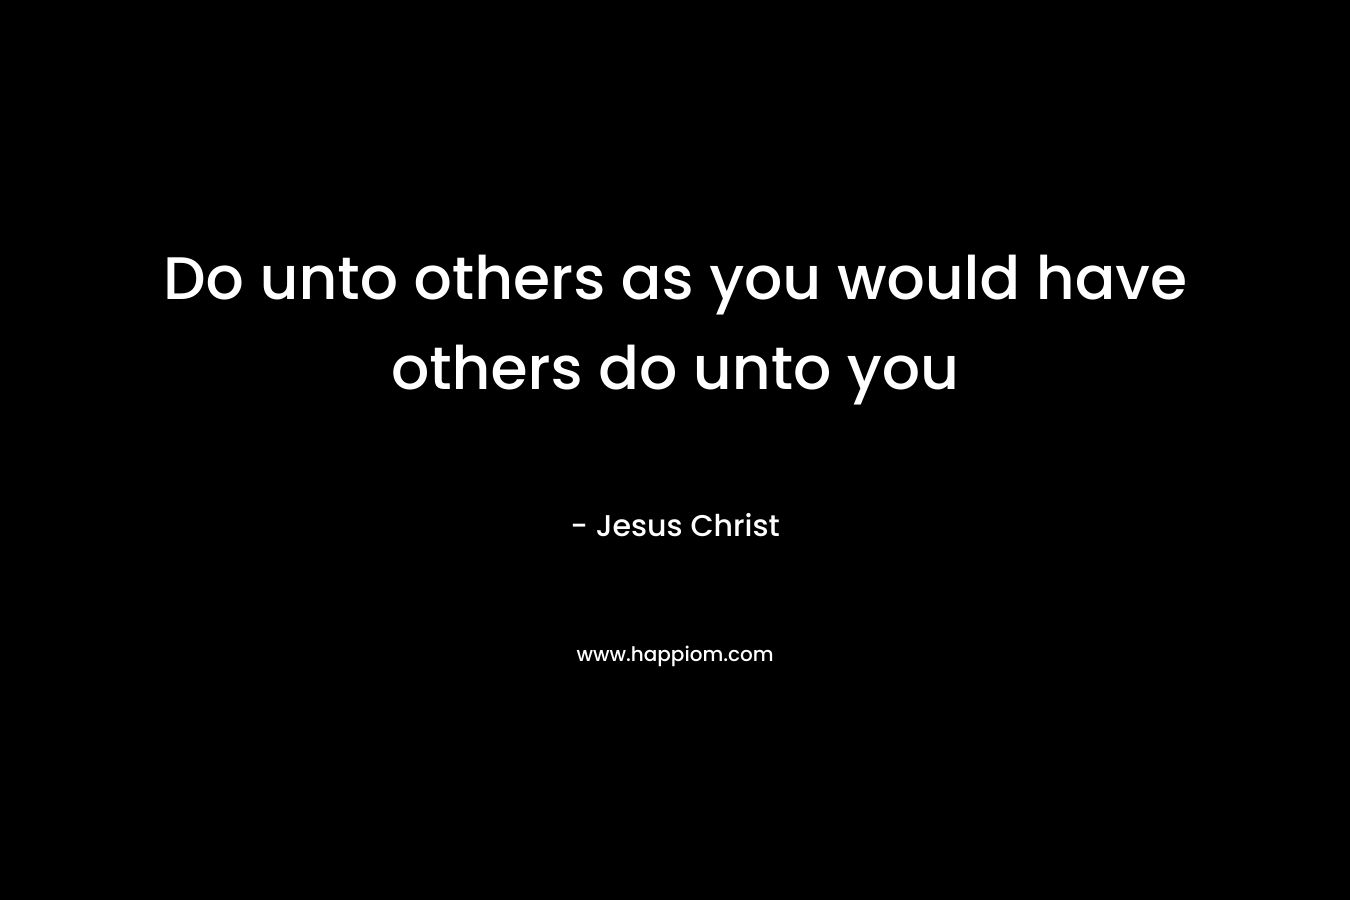 Do unto others as you would have others do unto you